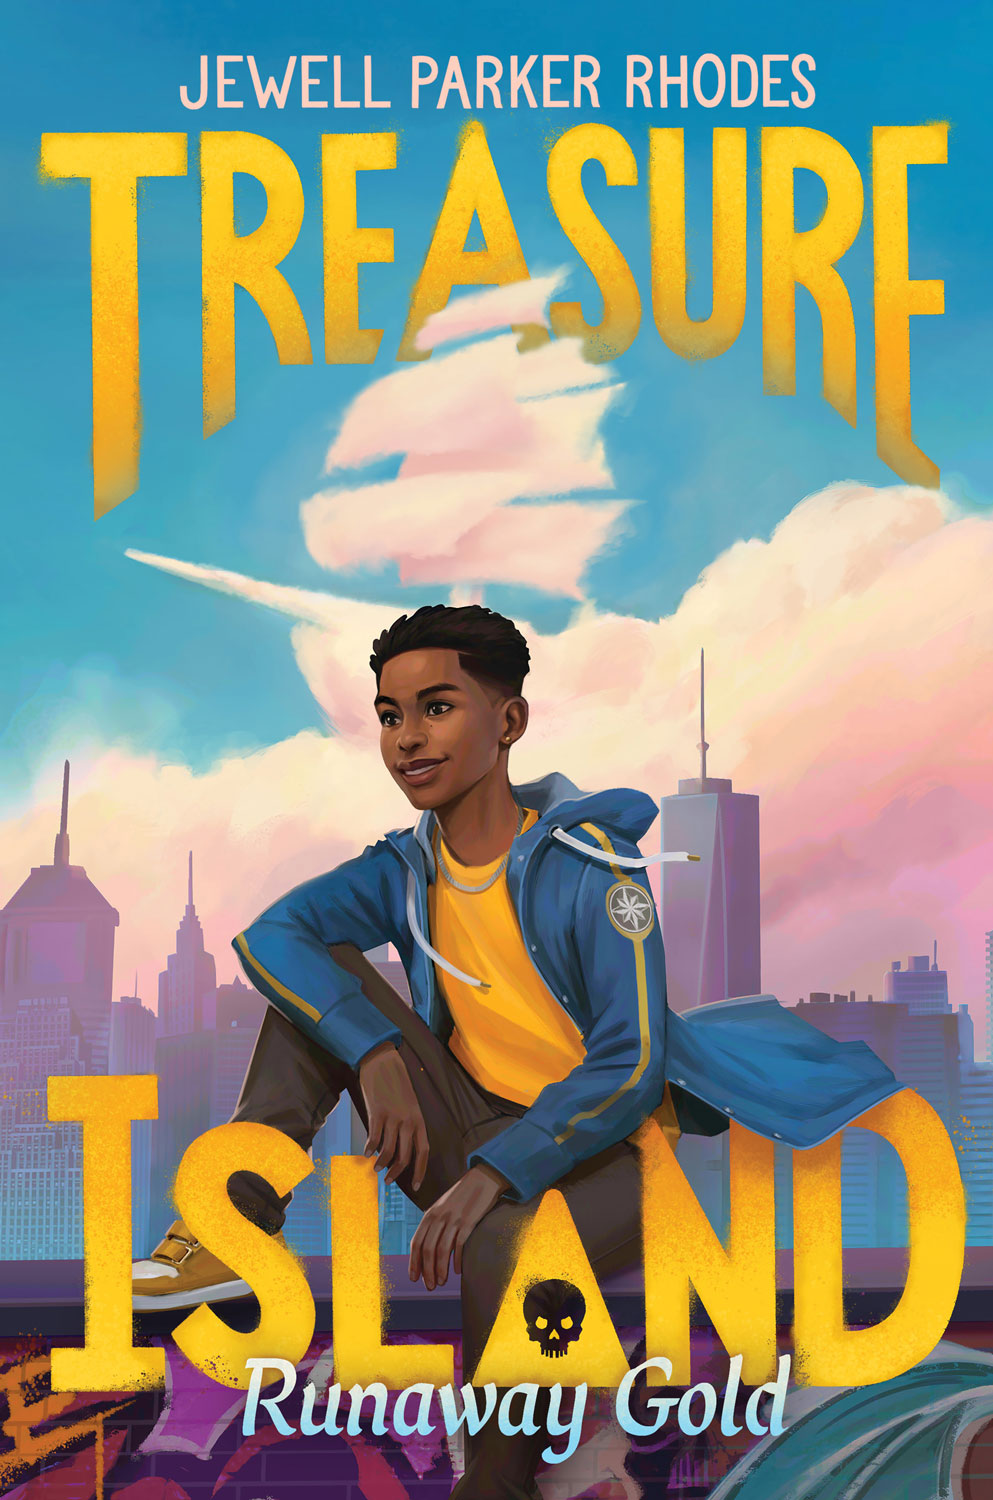 The Treasure Island book cover. Written by Jewell Parker Rhodes. A boy imagines a cloud in the sky that looks like a pirate ship sailing over his city.